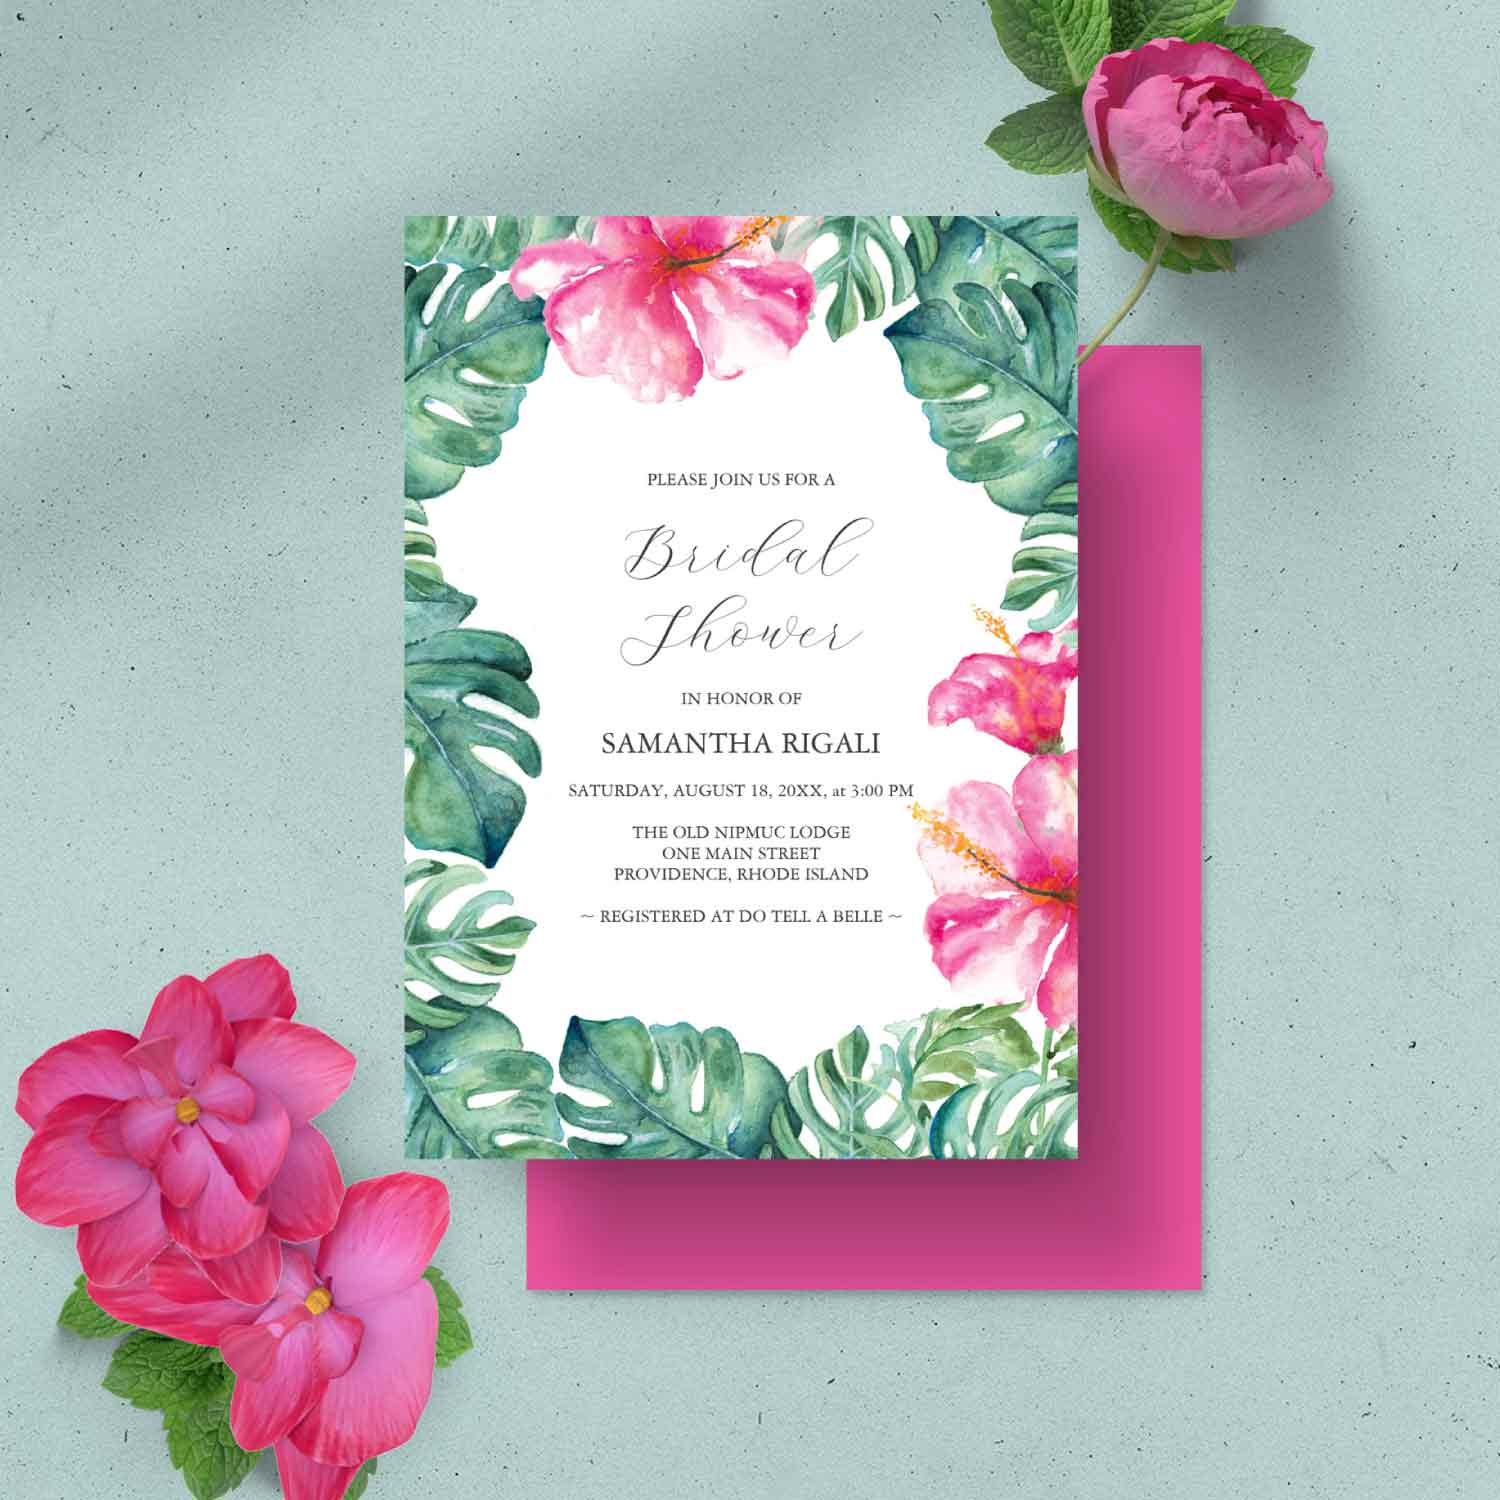 Bridal shower invitations feature tropical hibiscus flowers in vibrant shades of pink. Click to shop more watercolor bridal shower invitations by Victoria Grigaliunas of Do Tell A Belle.